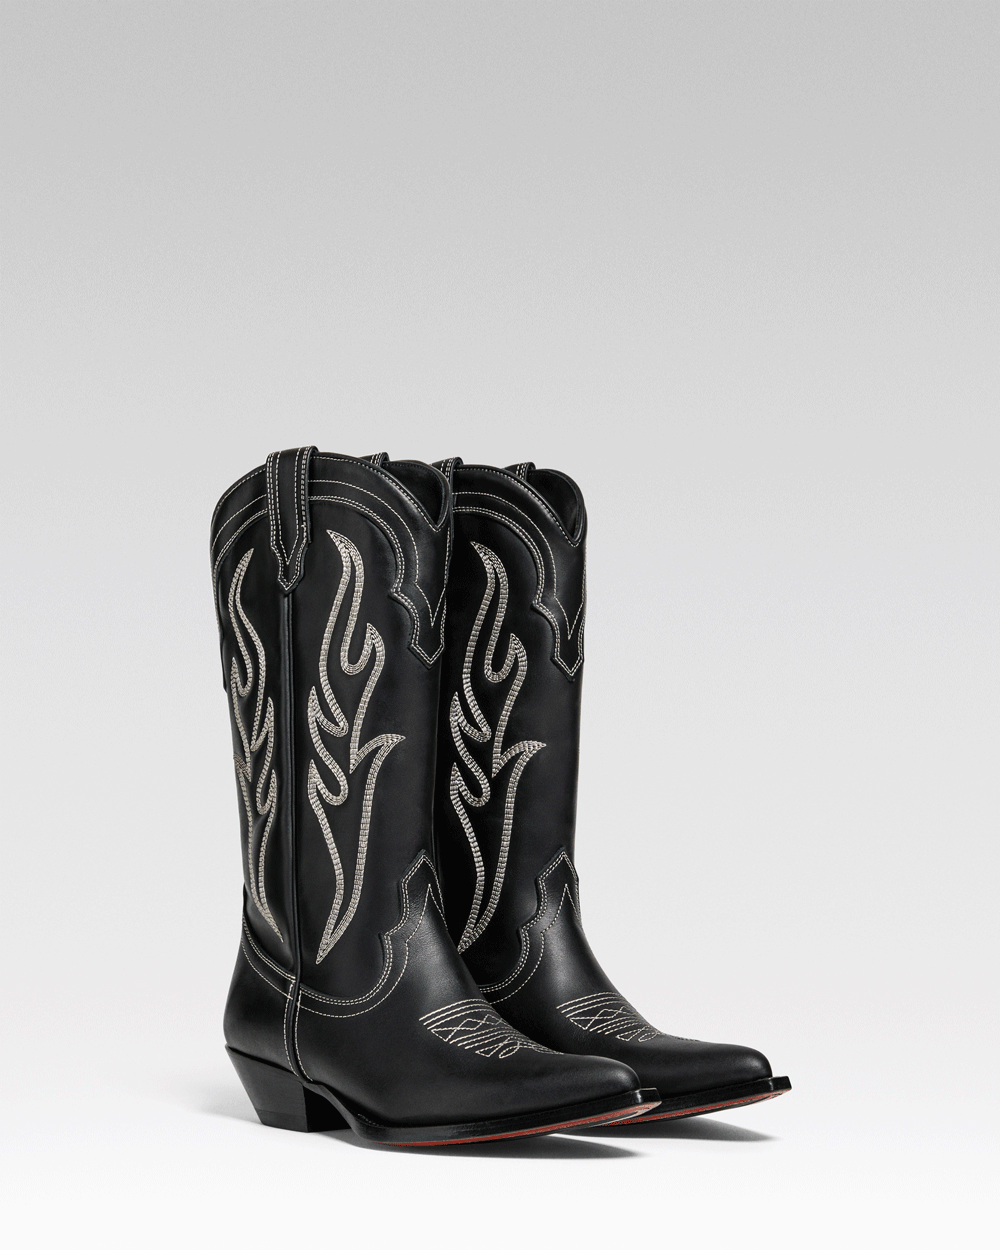 SANTA FE Women's Cowboy Boots in Black Calfskin | Off-White Embroidery